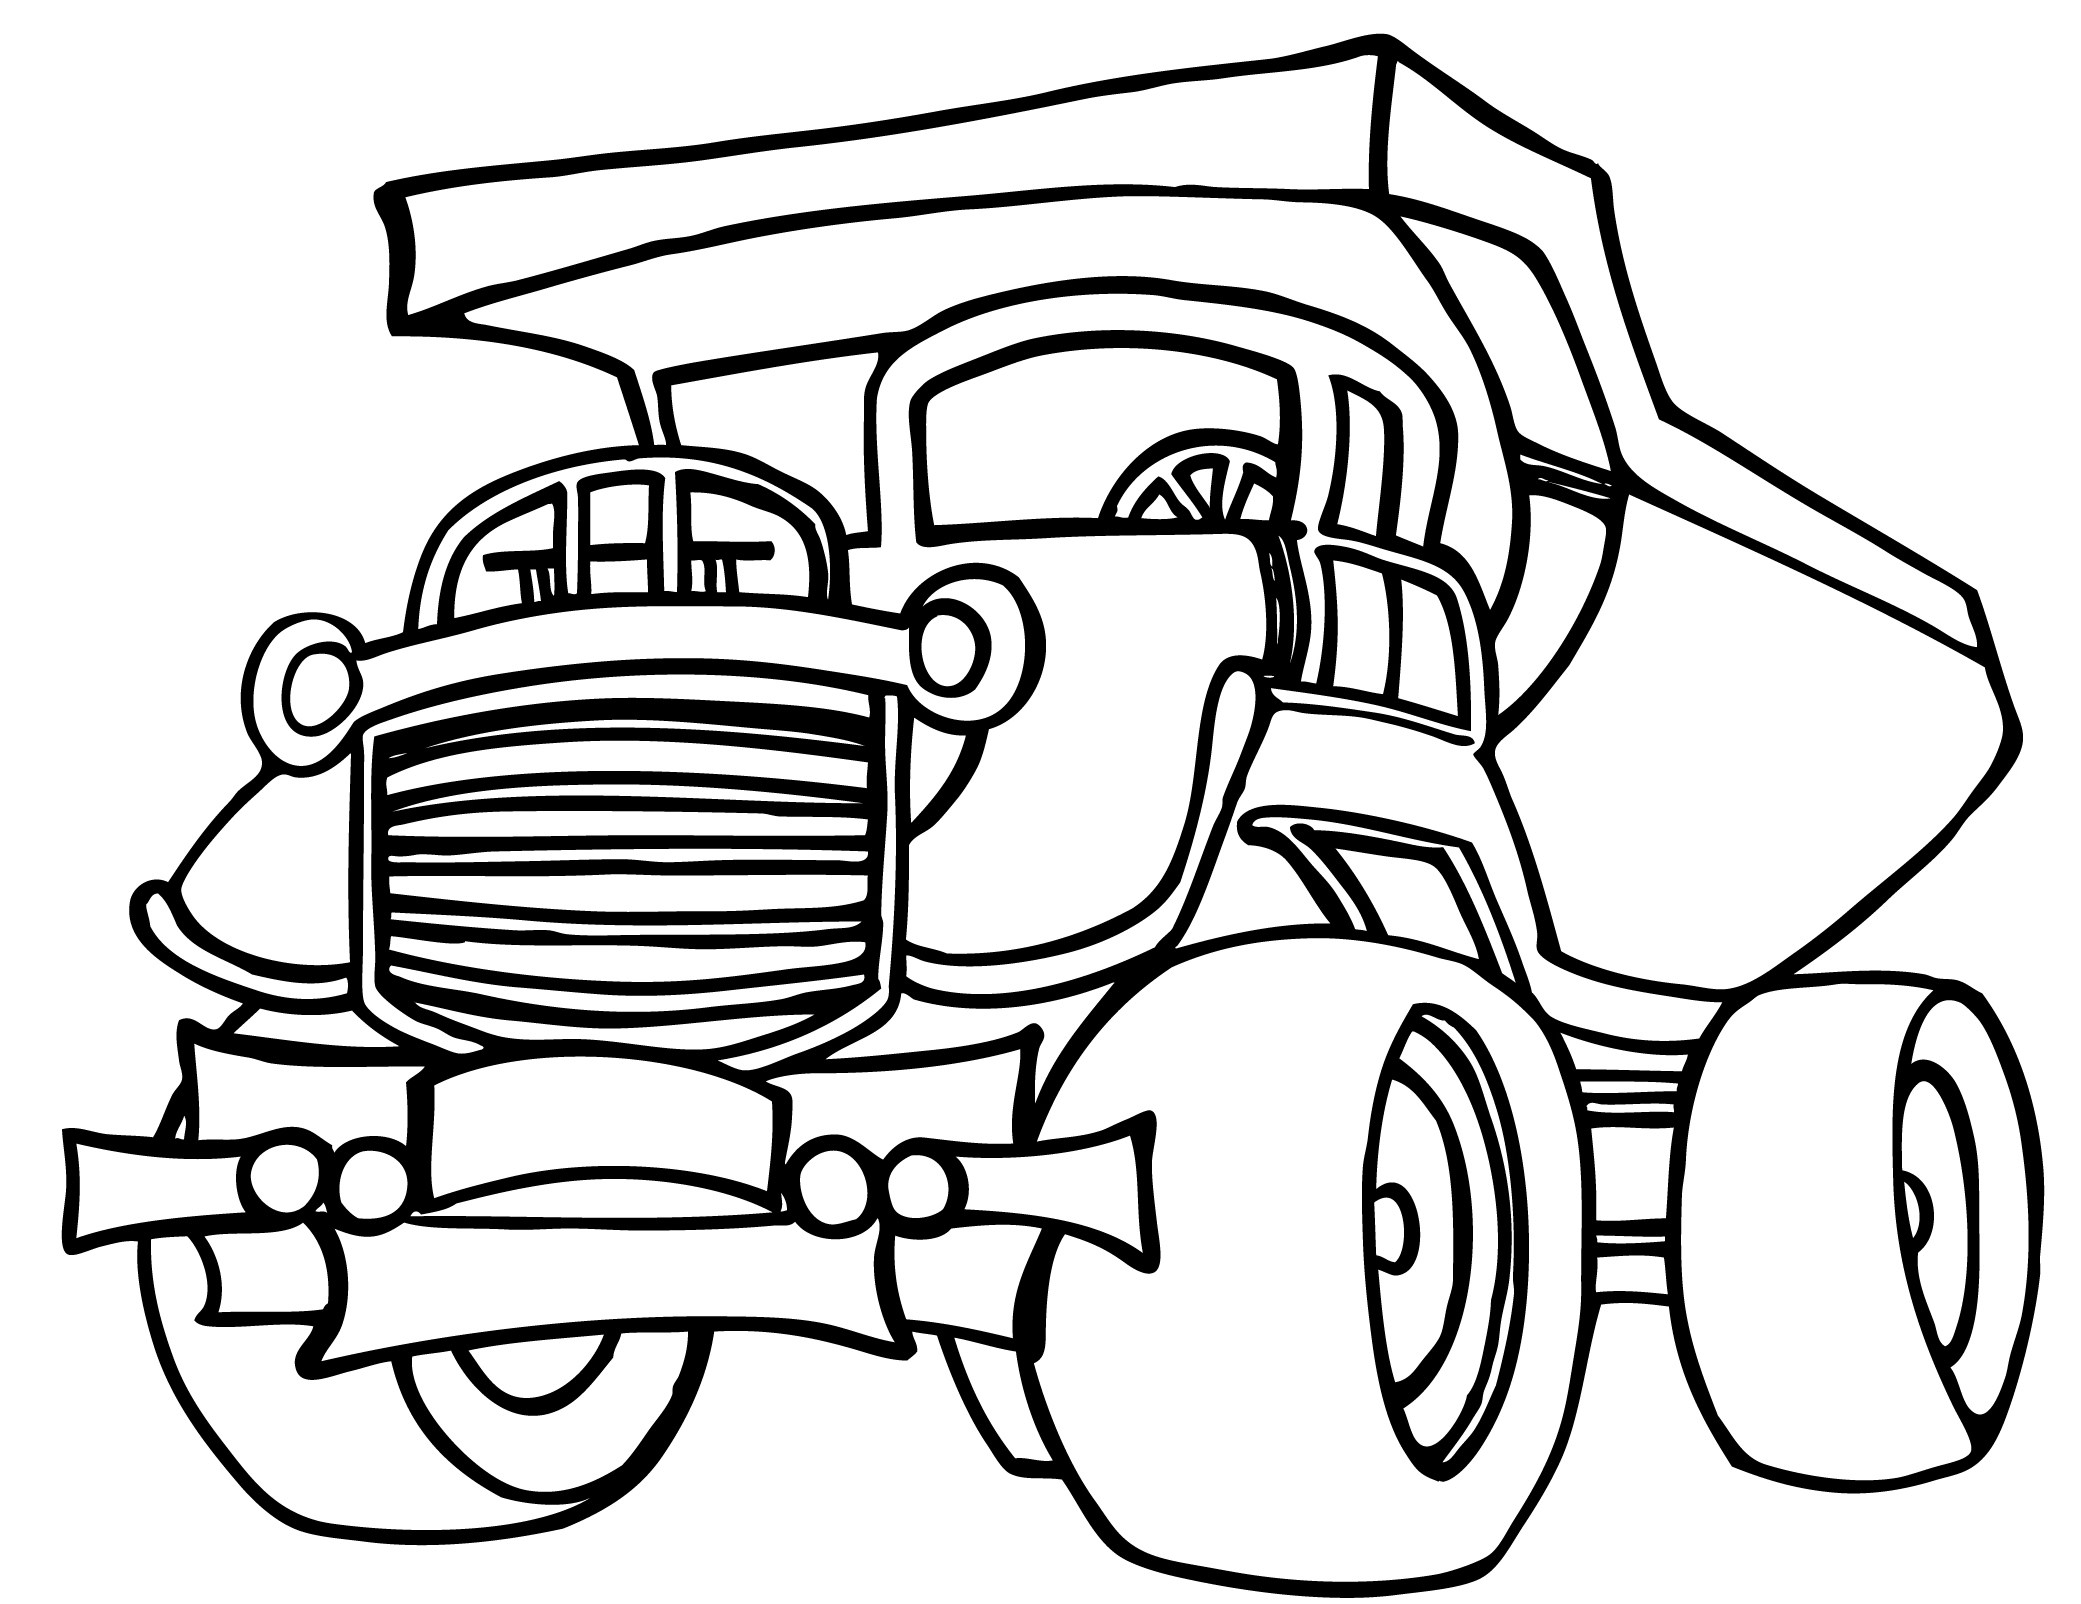 Lorry Colouring Pages - ClipArt Best